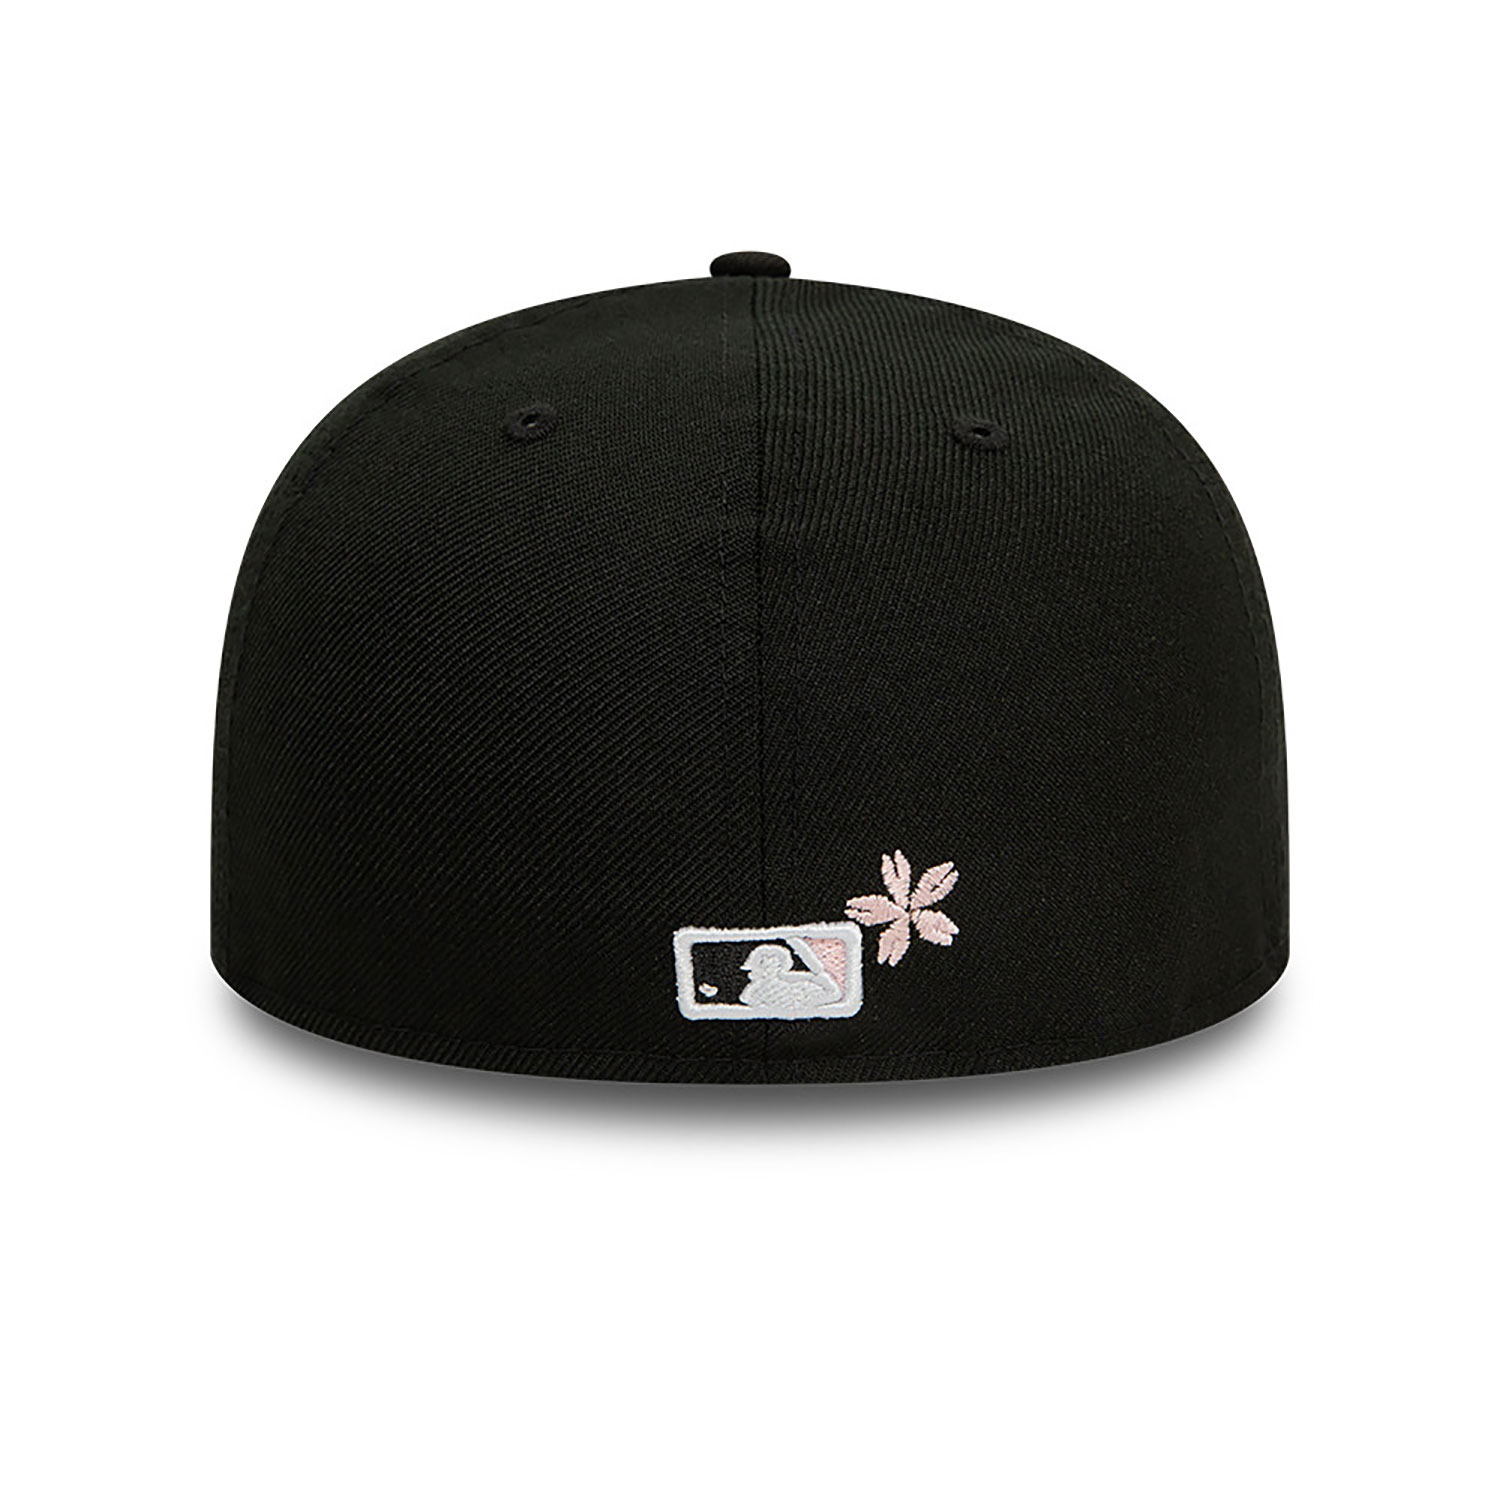 New York Yankees Cherry Blossom Black 59FIFTY Low Profile Cap